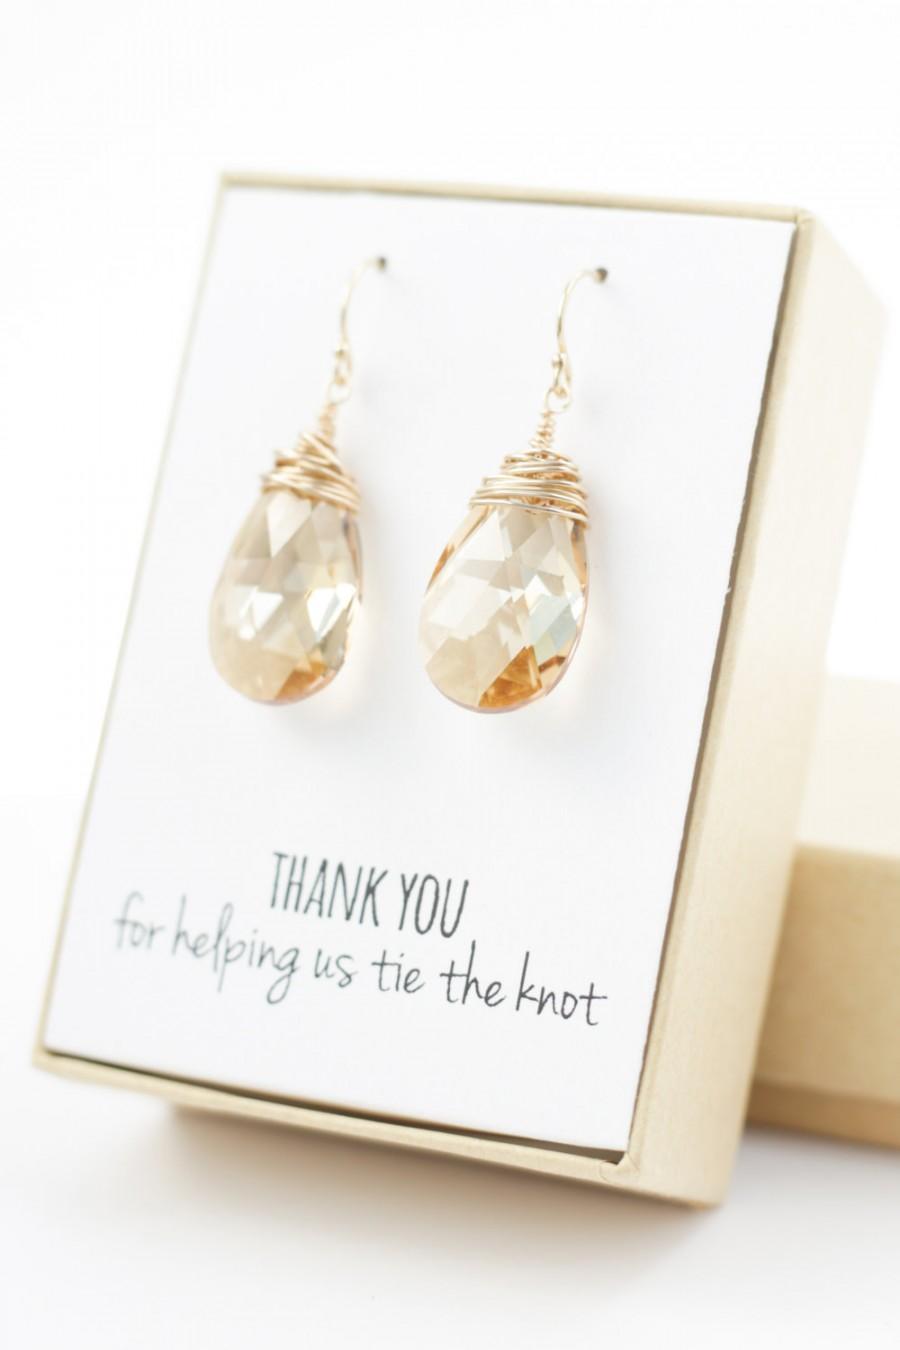 Mariage - Champagne Gold Swarovski Crystal Earrings - Large Crystal Earrings - Champagne Swarovski Earrings - Wire-Wrapped - Bridesmaid Earrings Gift